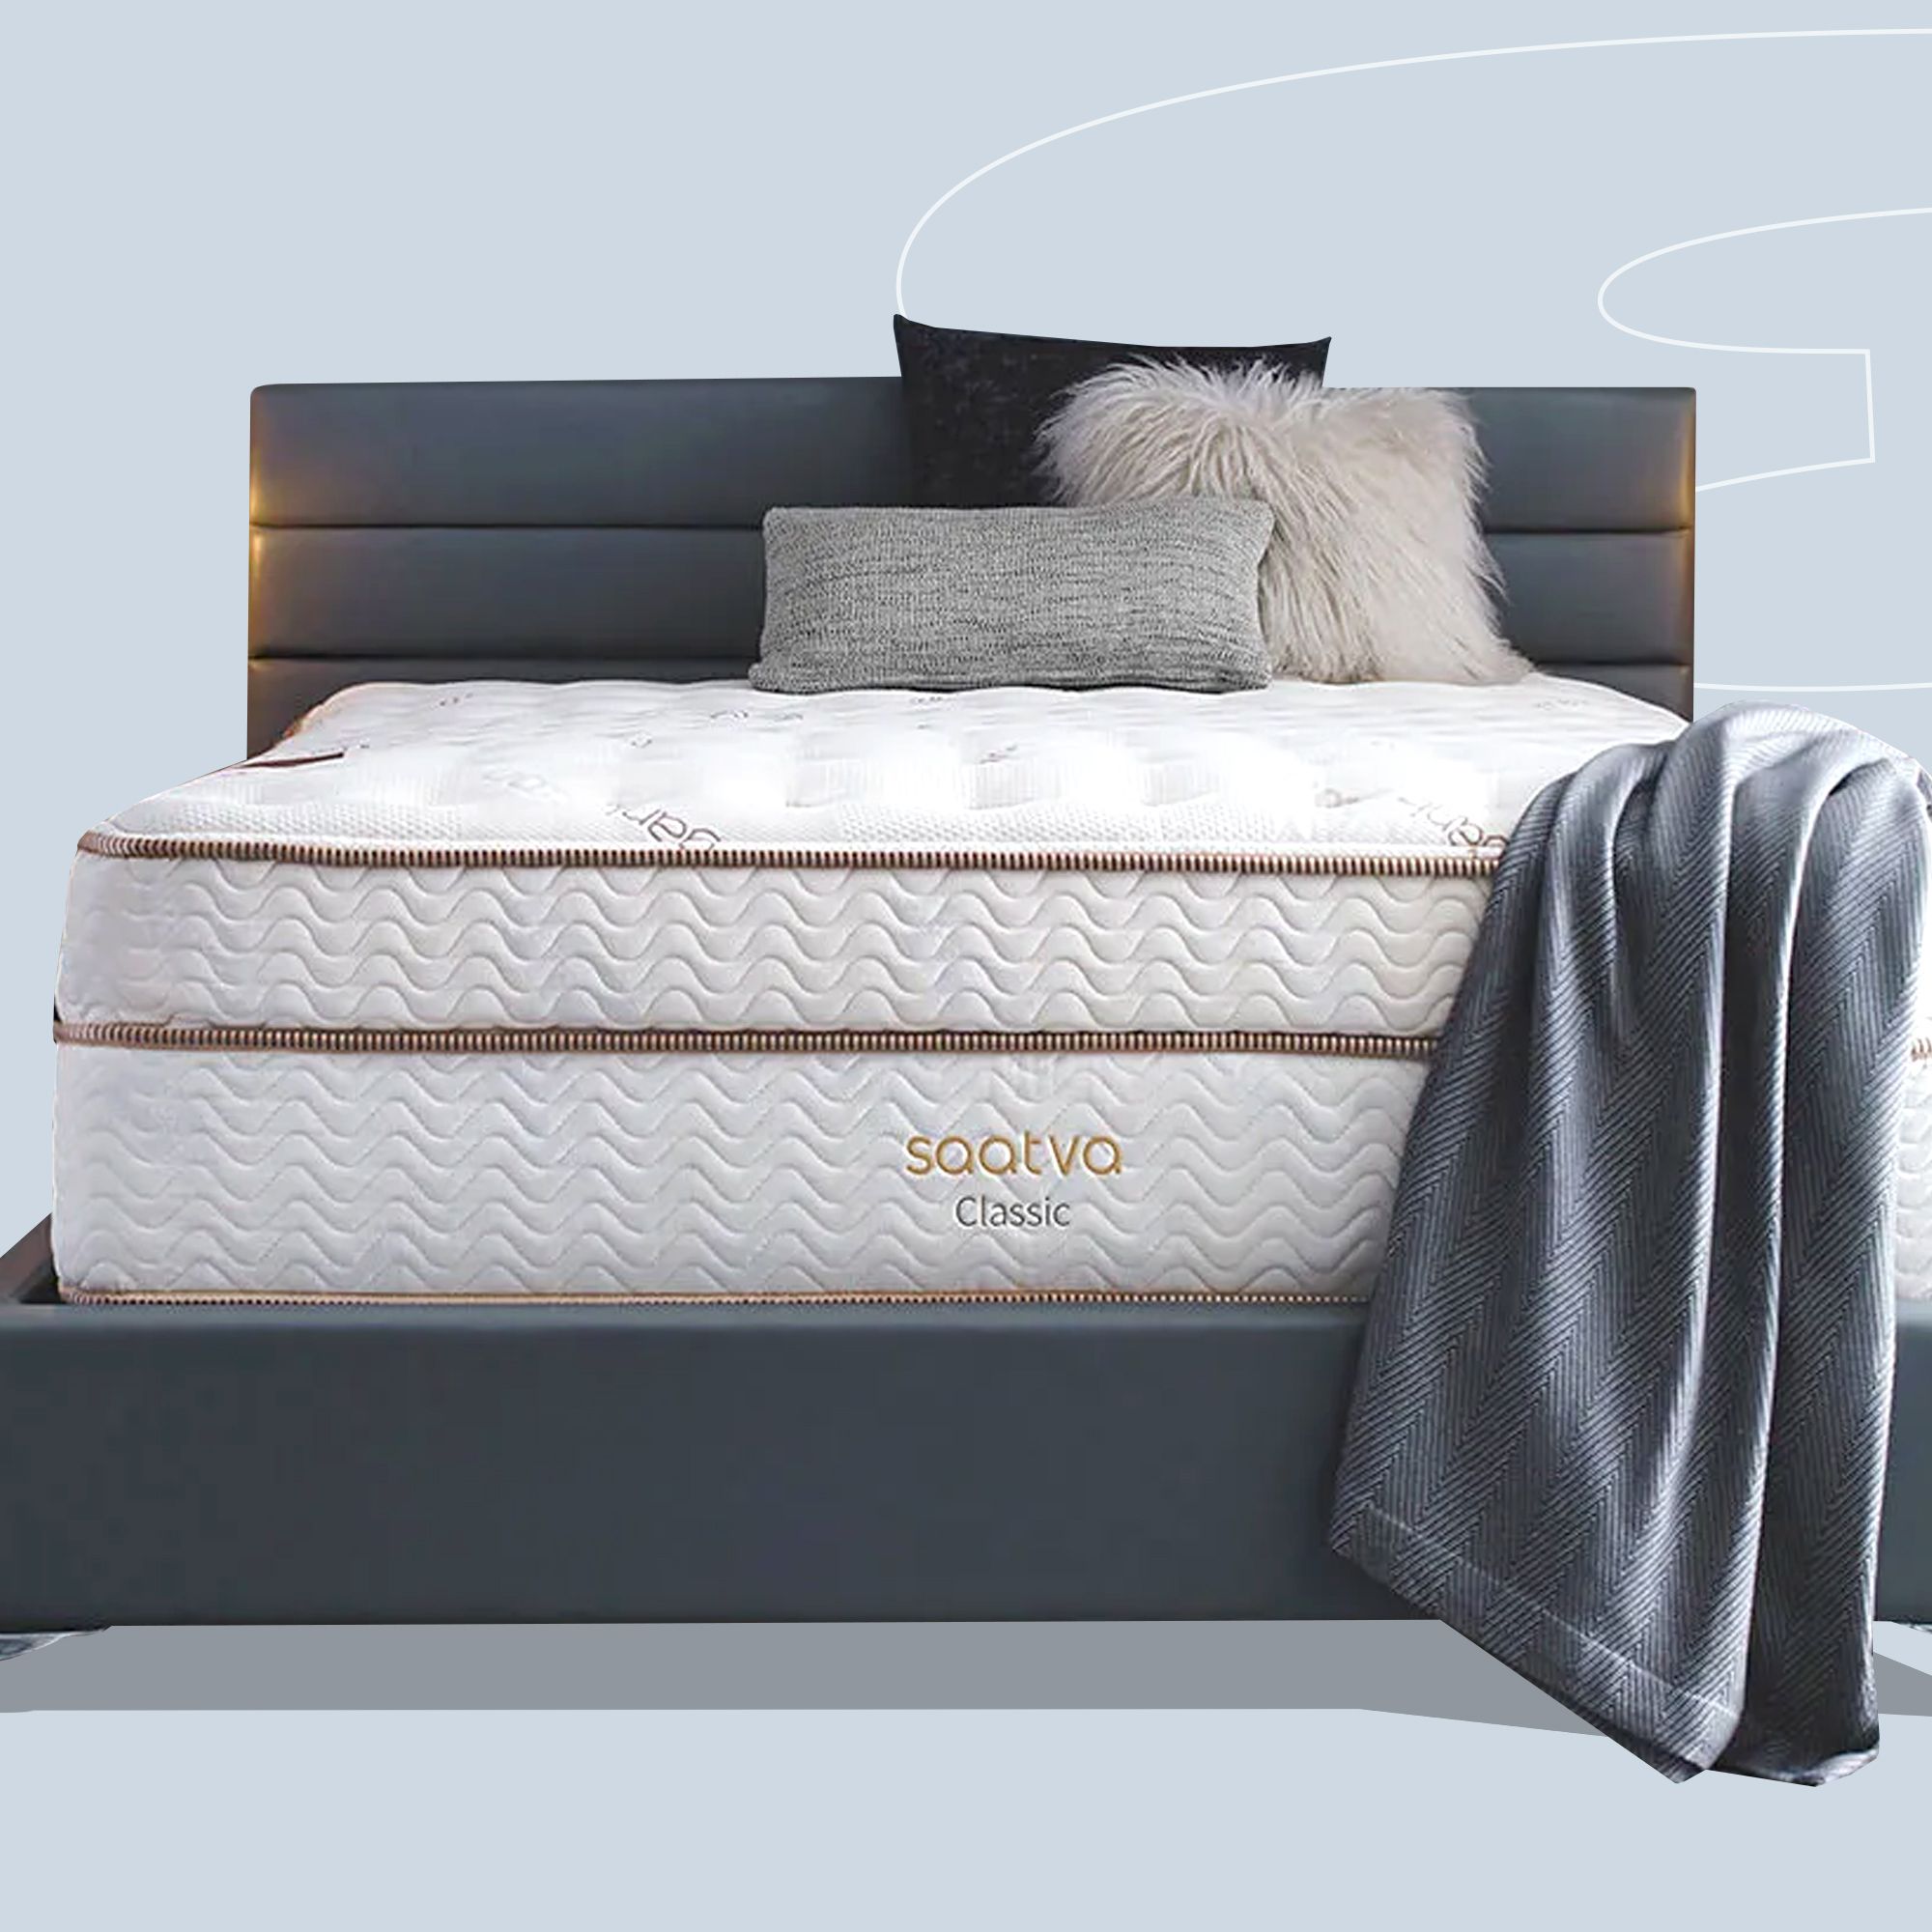 Why Saatva's Classic Mattress Is the Best One Money Can Buy